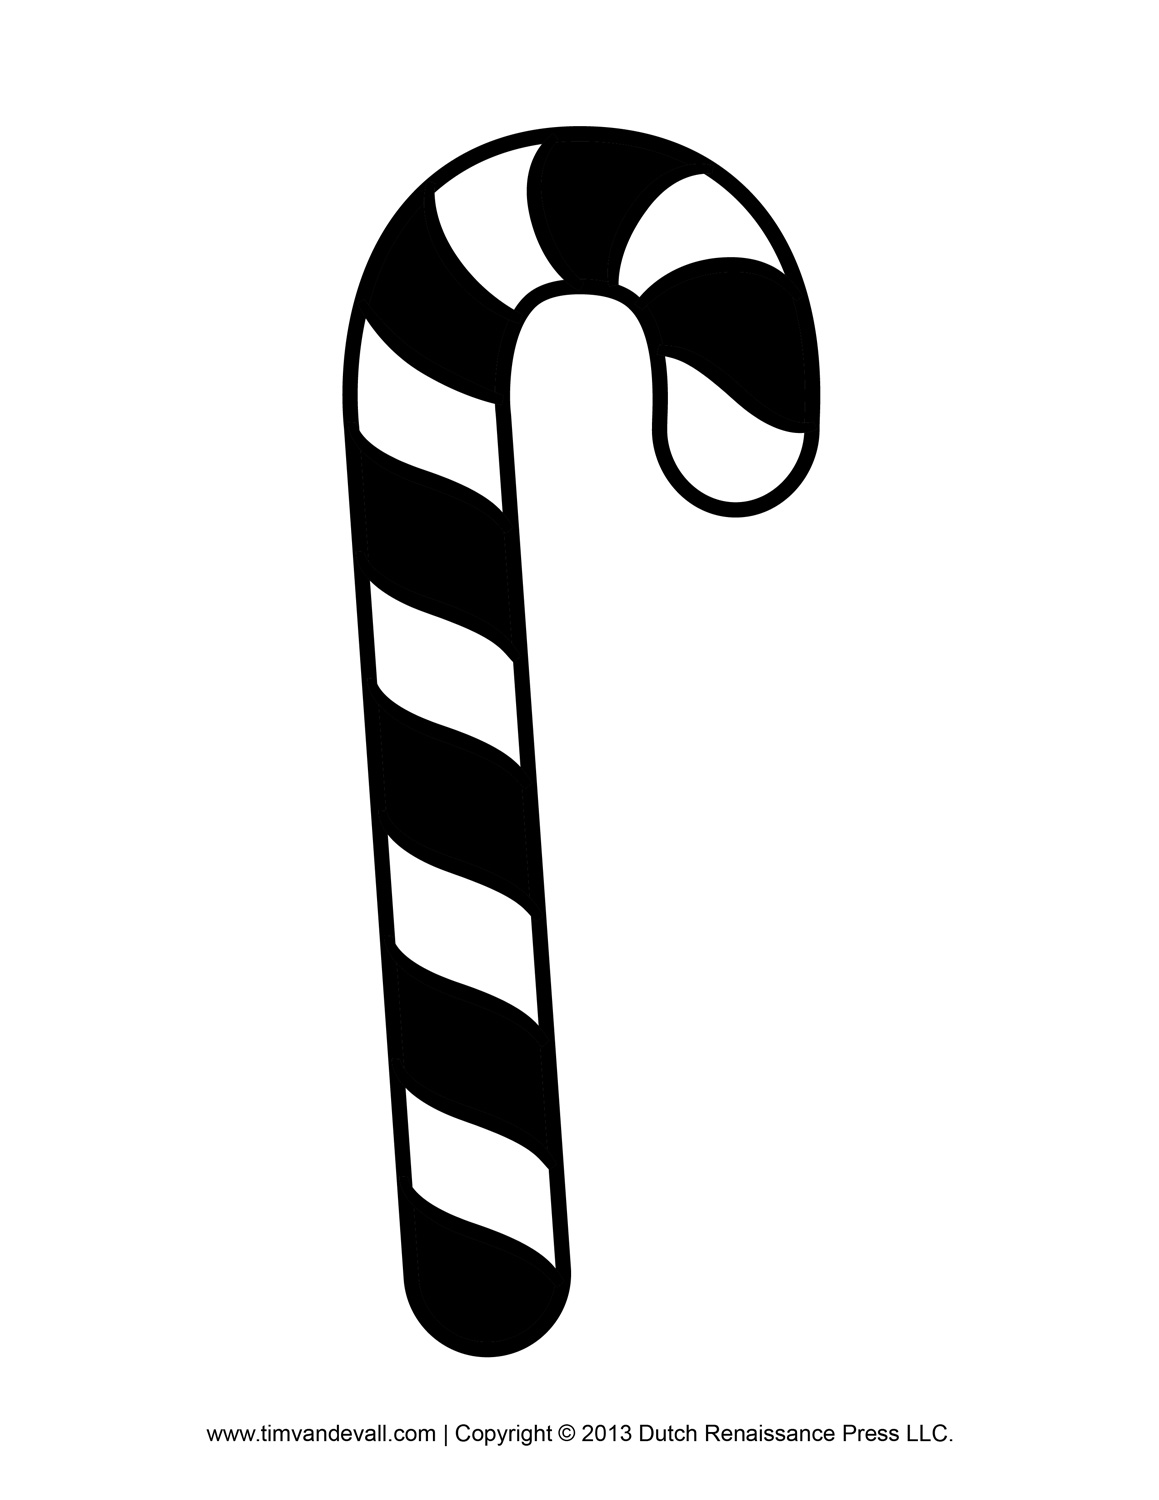 Free Candy Cane Template Printables, Crafts, Clipart  Decorations